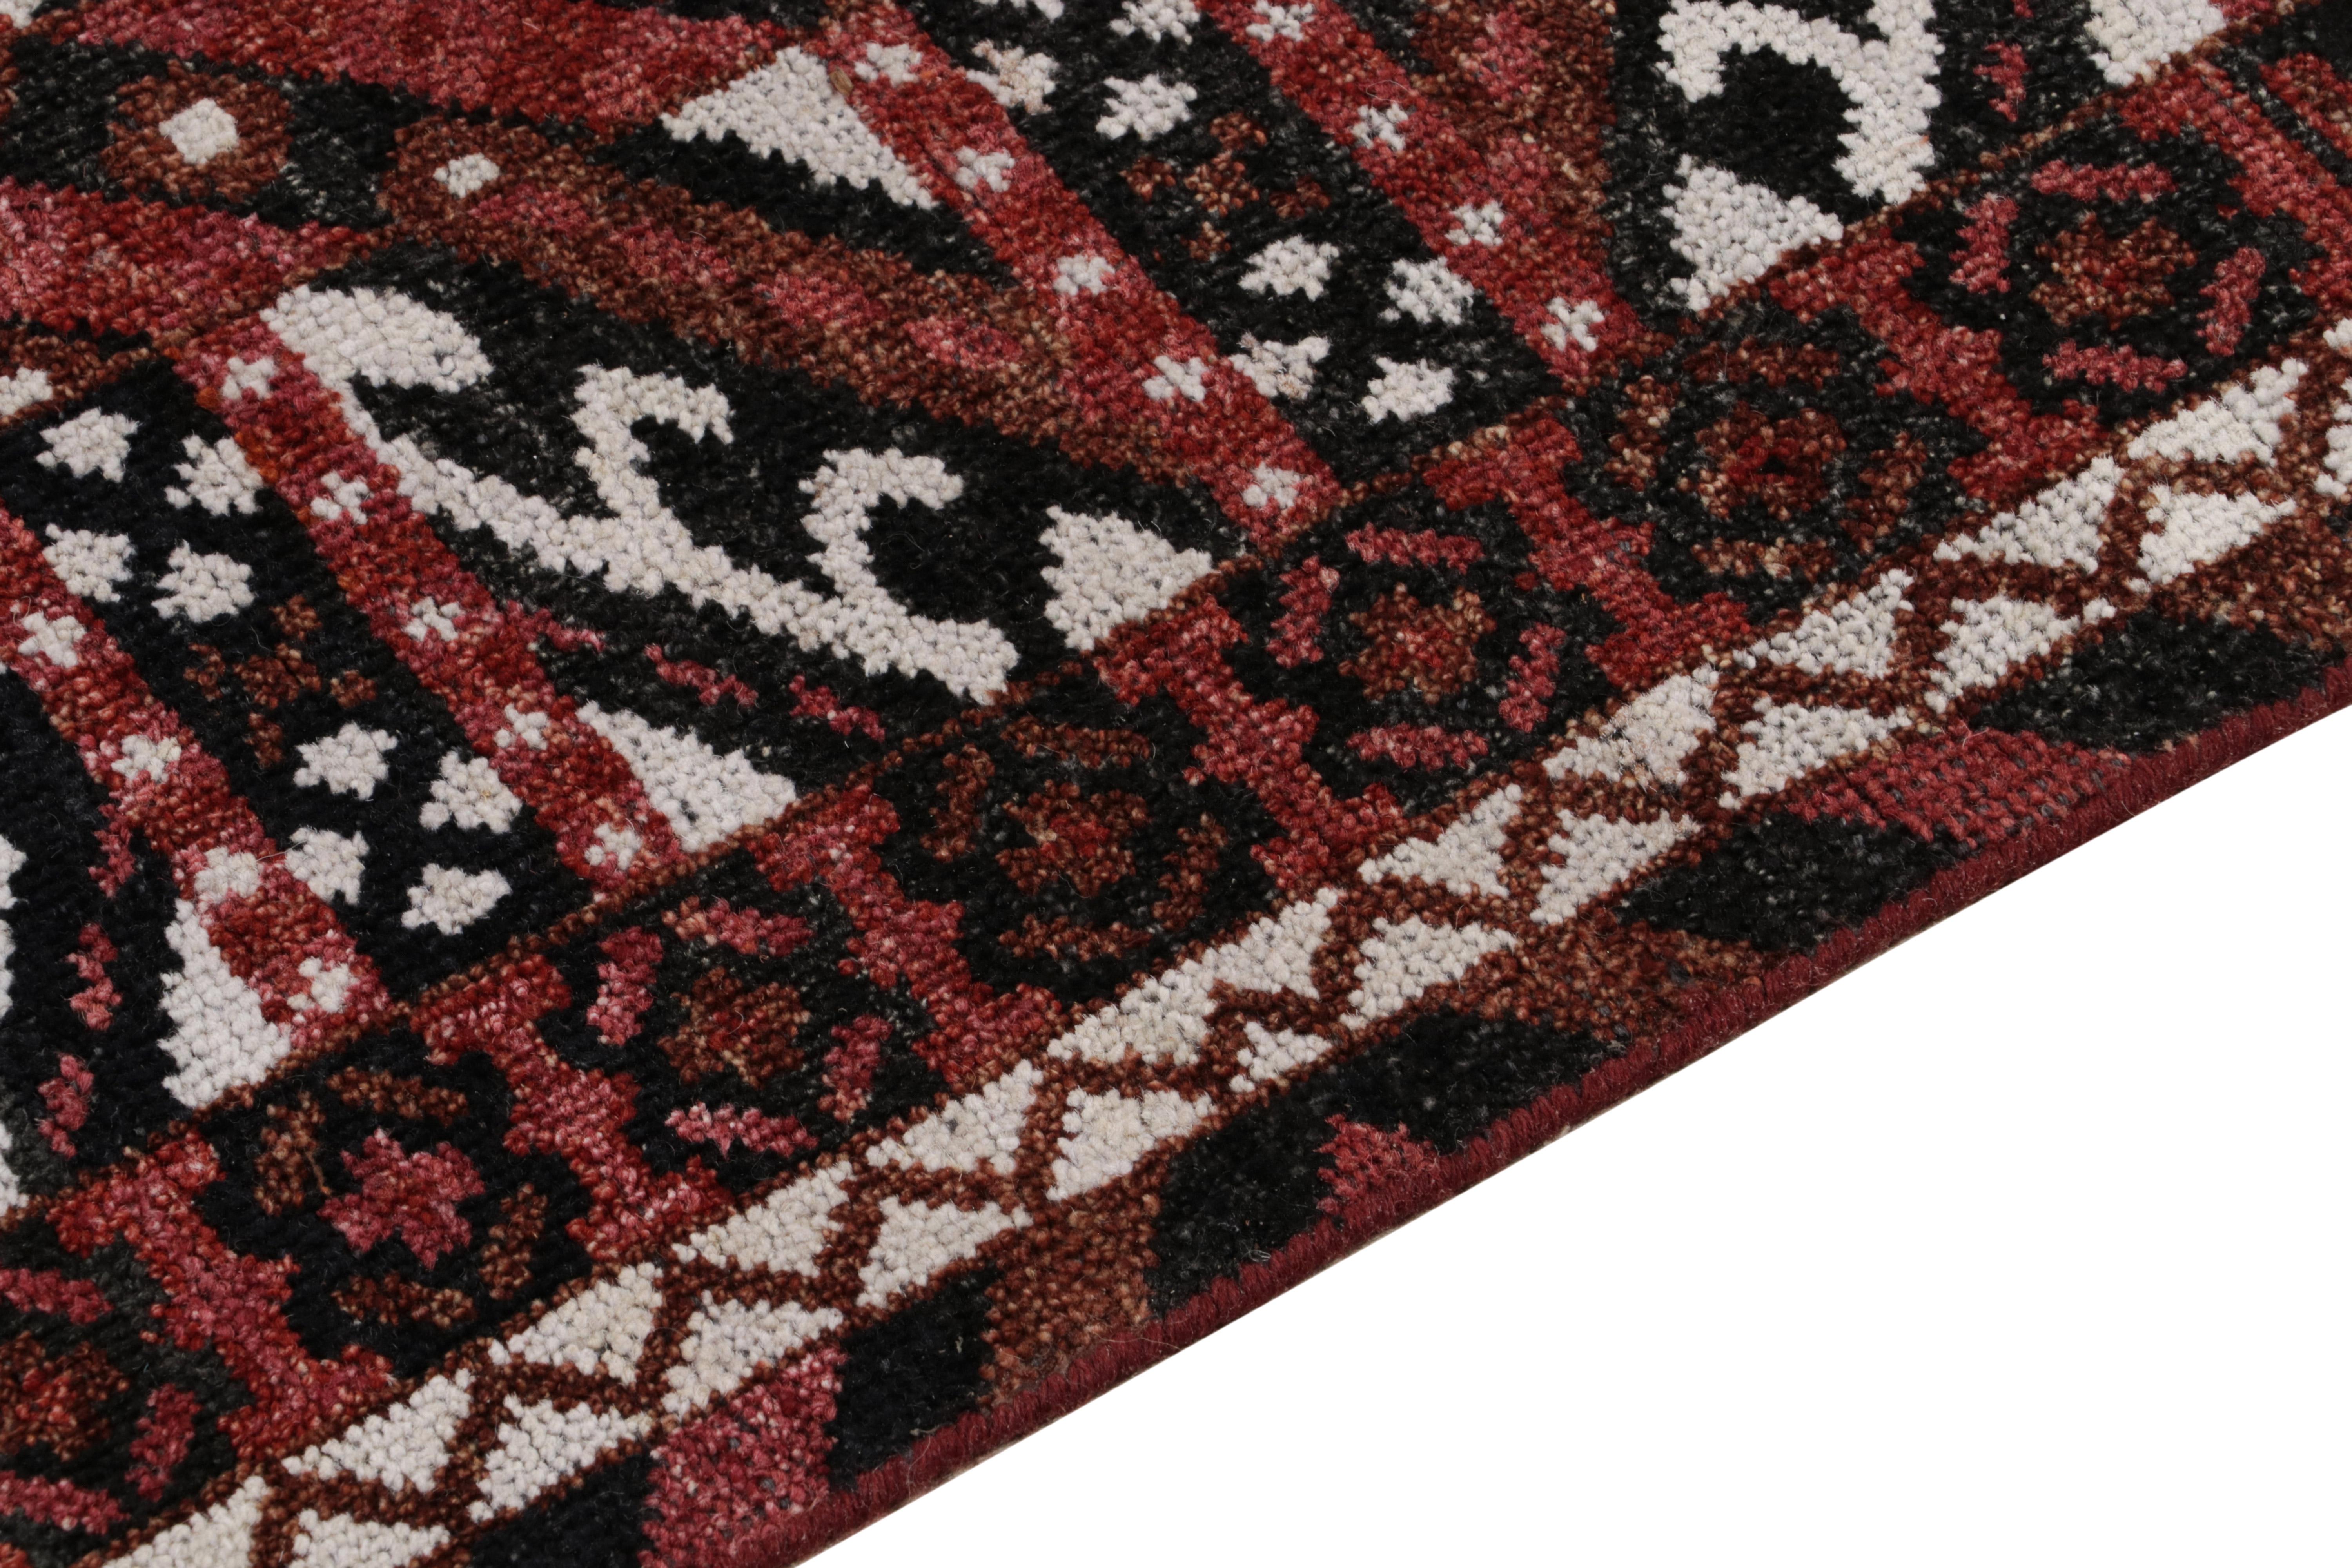 Rug & Kilim's Tribal Style Runner in Red, Black and White Geometric Pattern In New Condition For Sale In Long Island City, NY